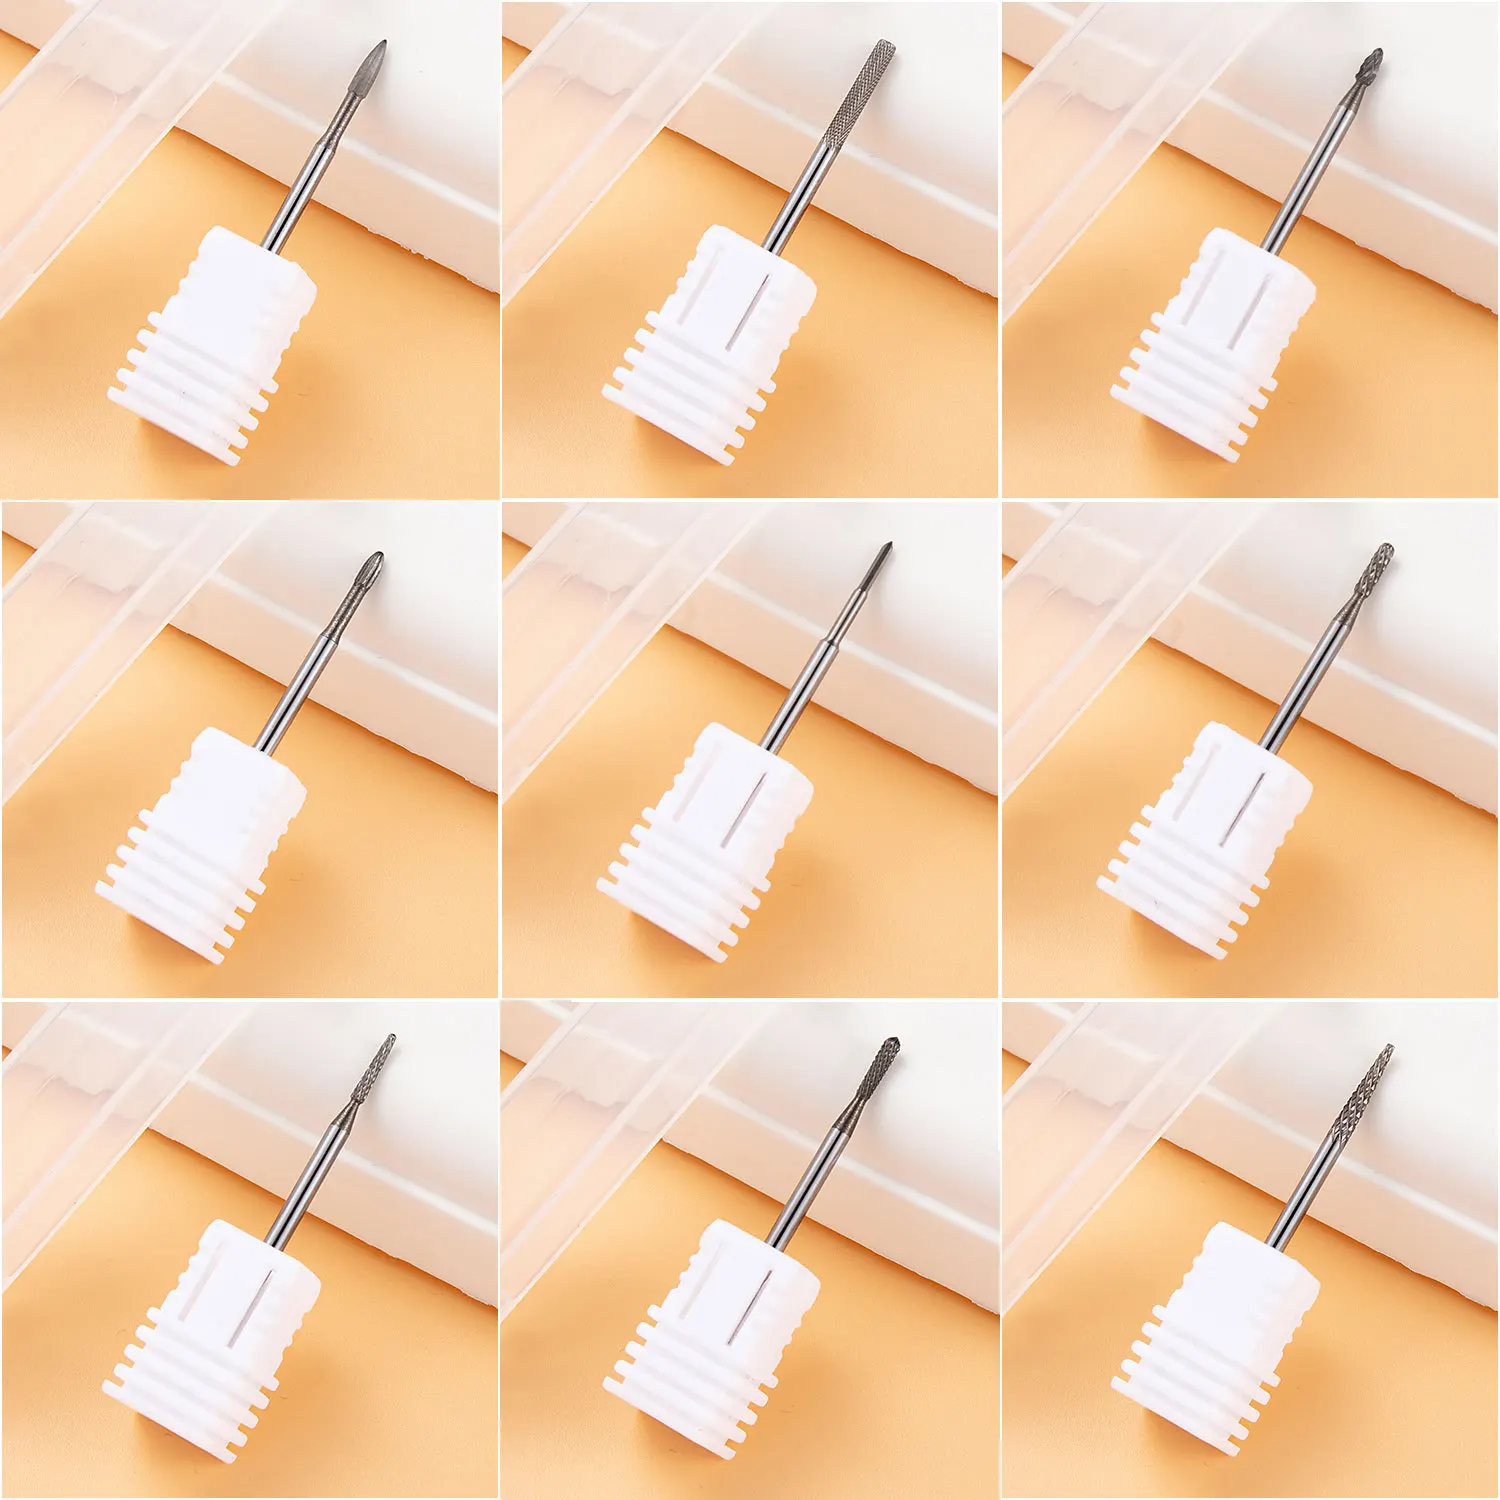 

Professional Tungsten Nail Drill Bits Cabide Milling Cutter Nail Sander Tips for for Manicure Cuticle Remove Efile Accesories